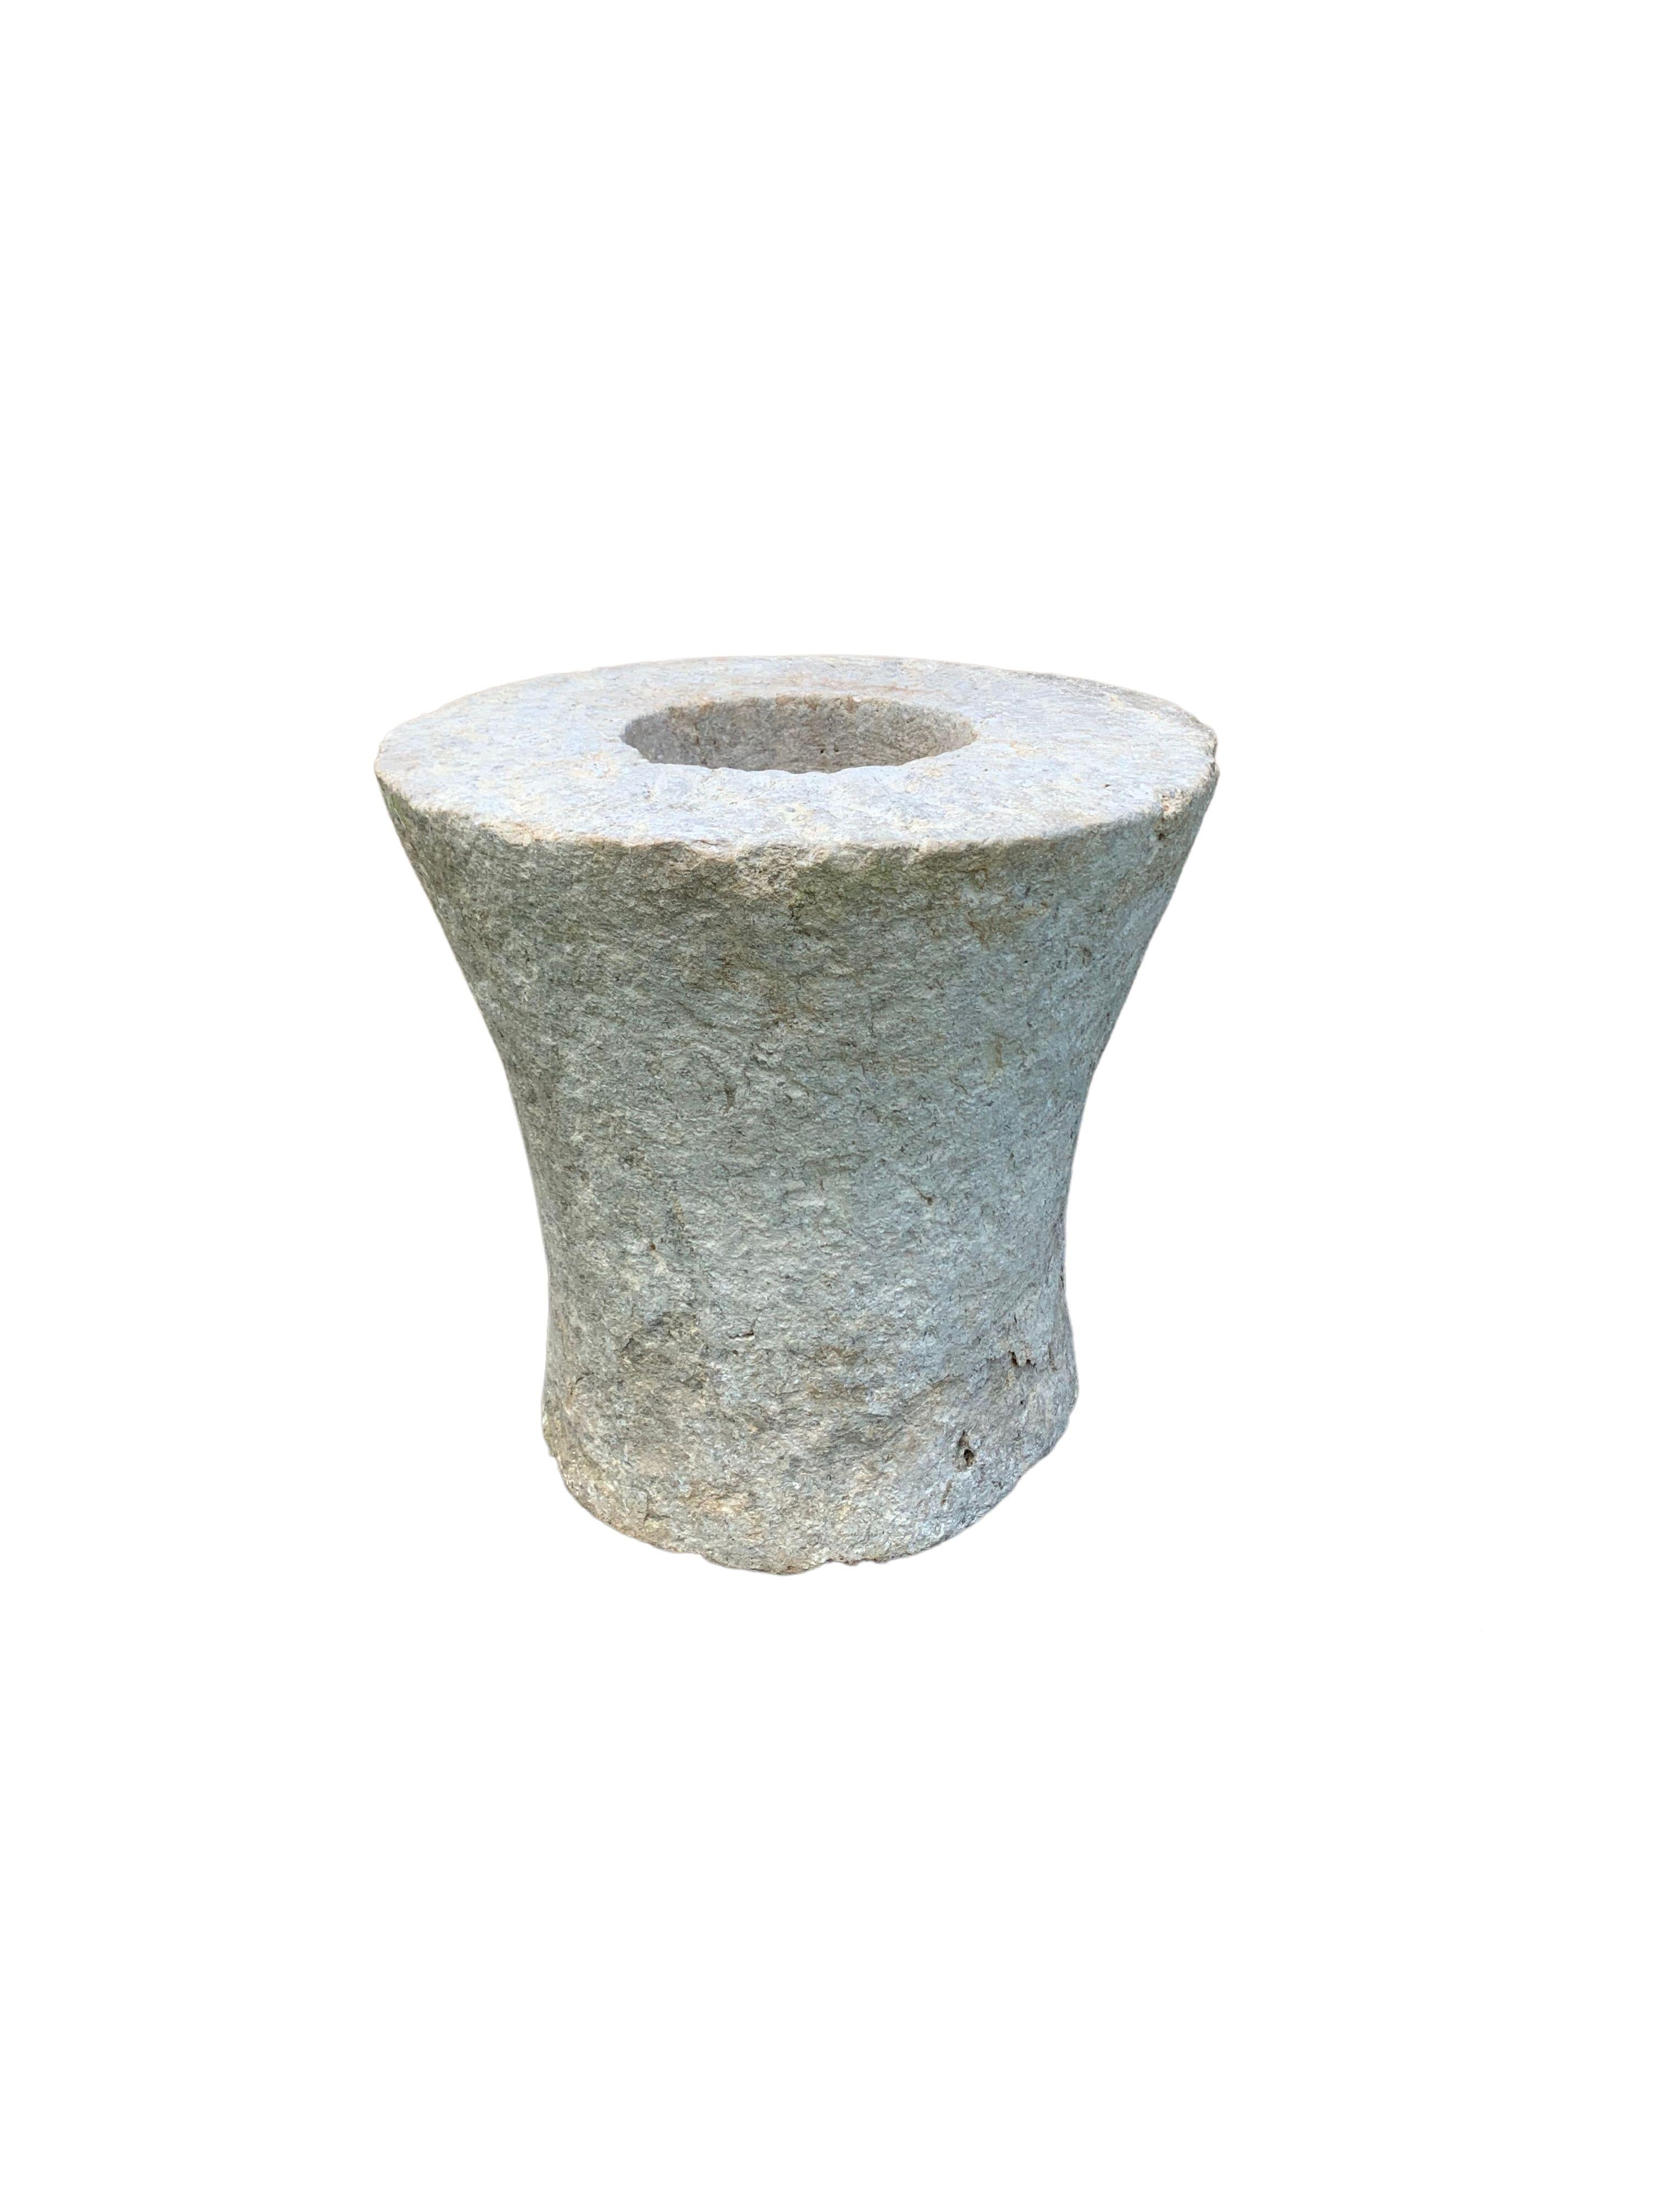 A limestone mortar soured from rural Java & crafted from a solid limestone slab. A raw and organic object with beautiful textures. A versatile decorative object despite its once utilitarian function of pounding spice mixes. It has a great weight to